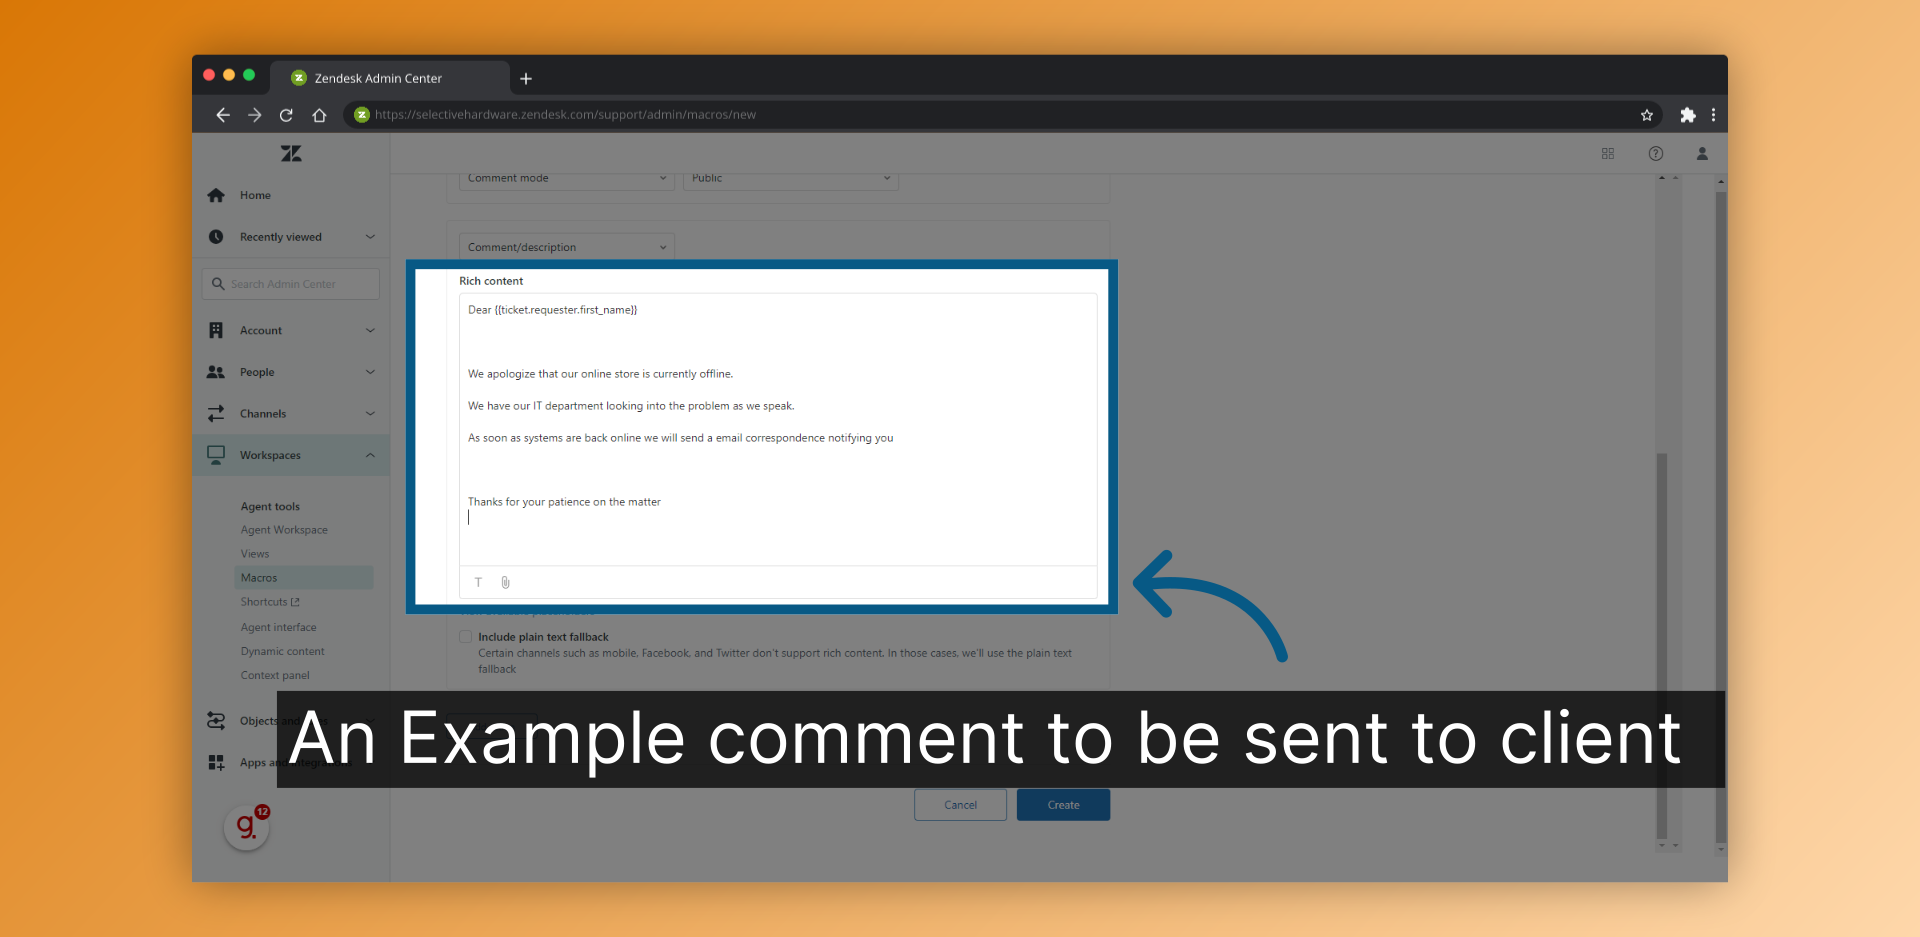 An Example comment to be sent to client